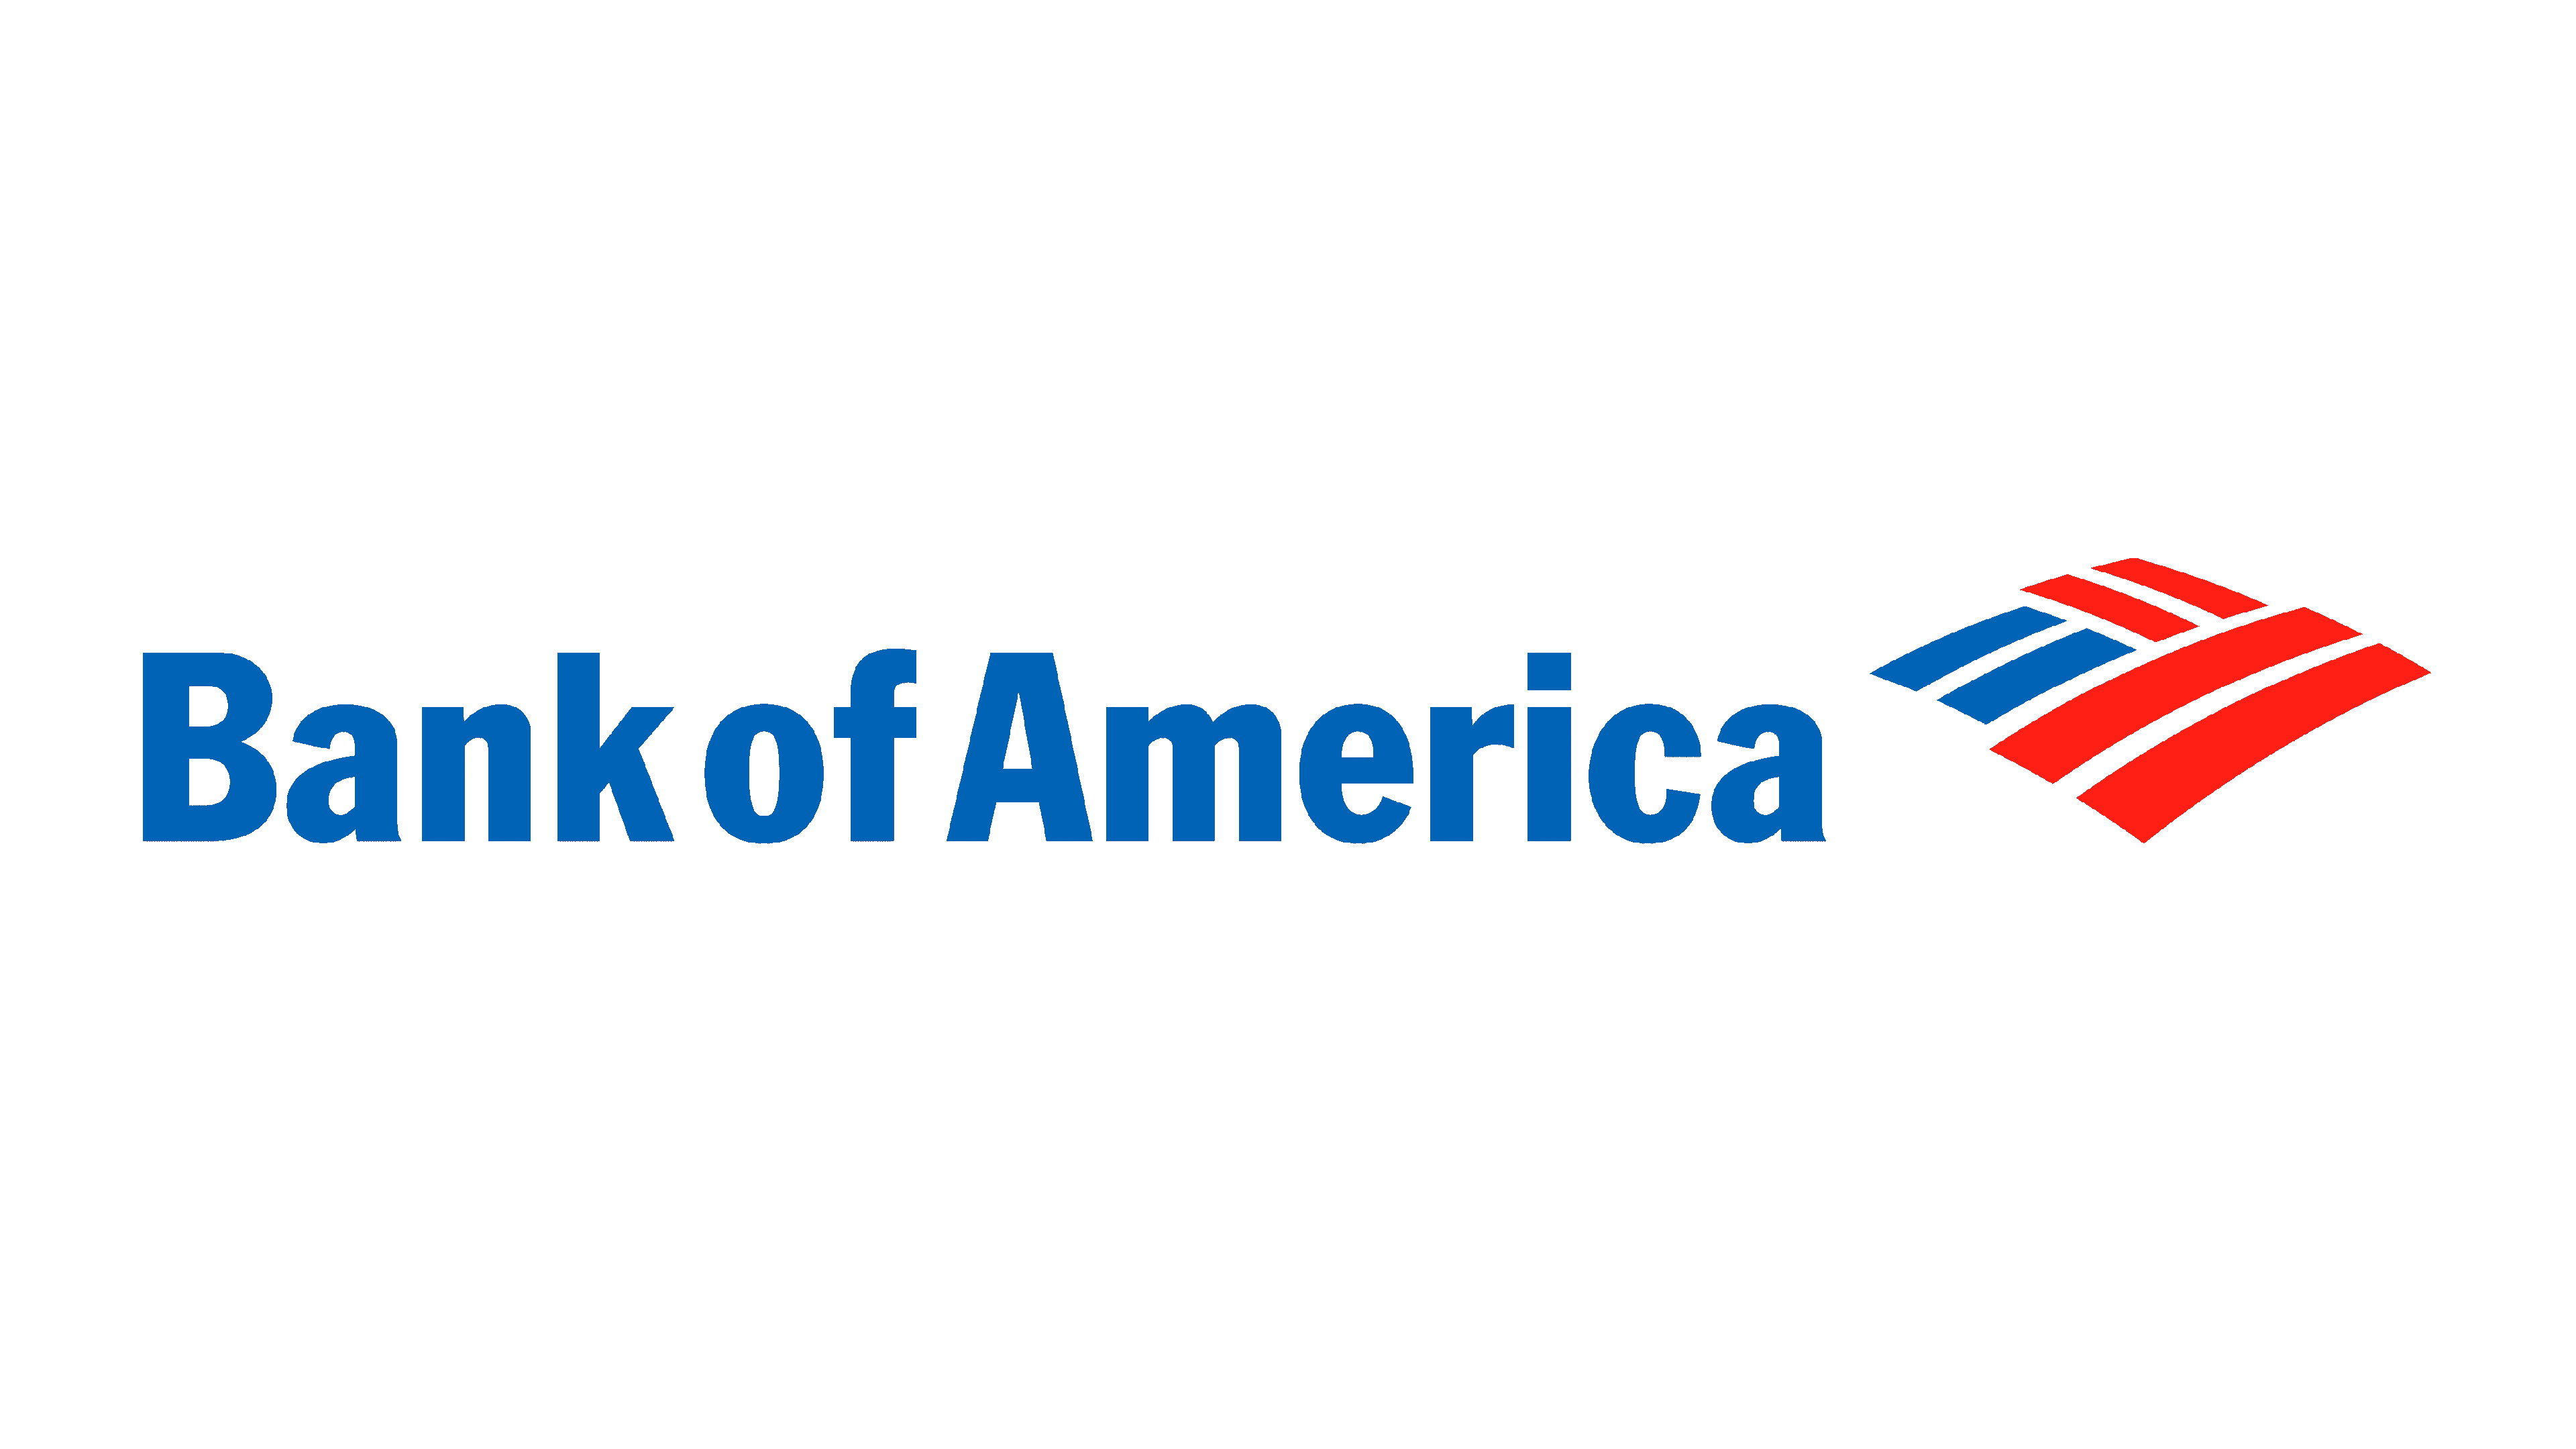 Bank of America Logo and symbol, meaning, history, sign.